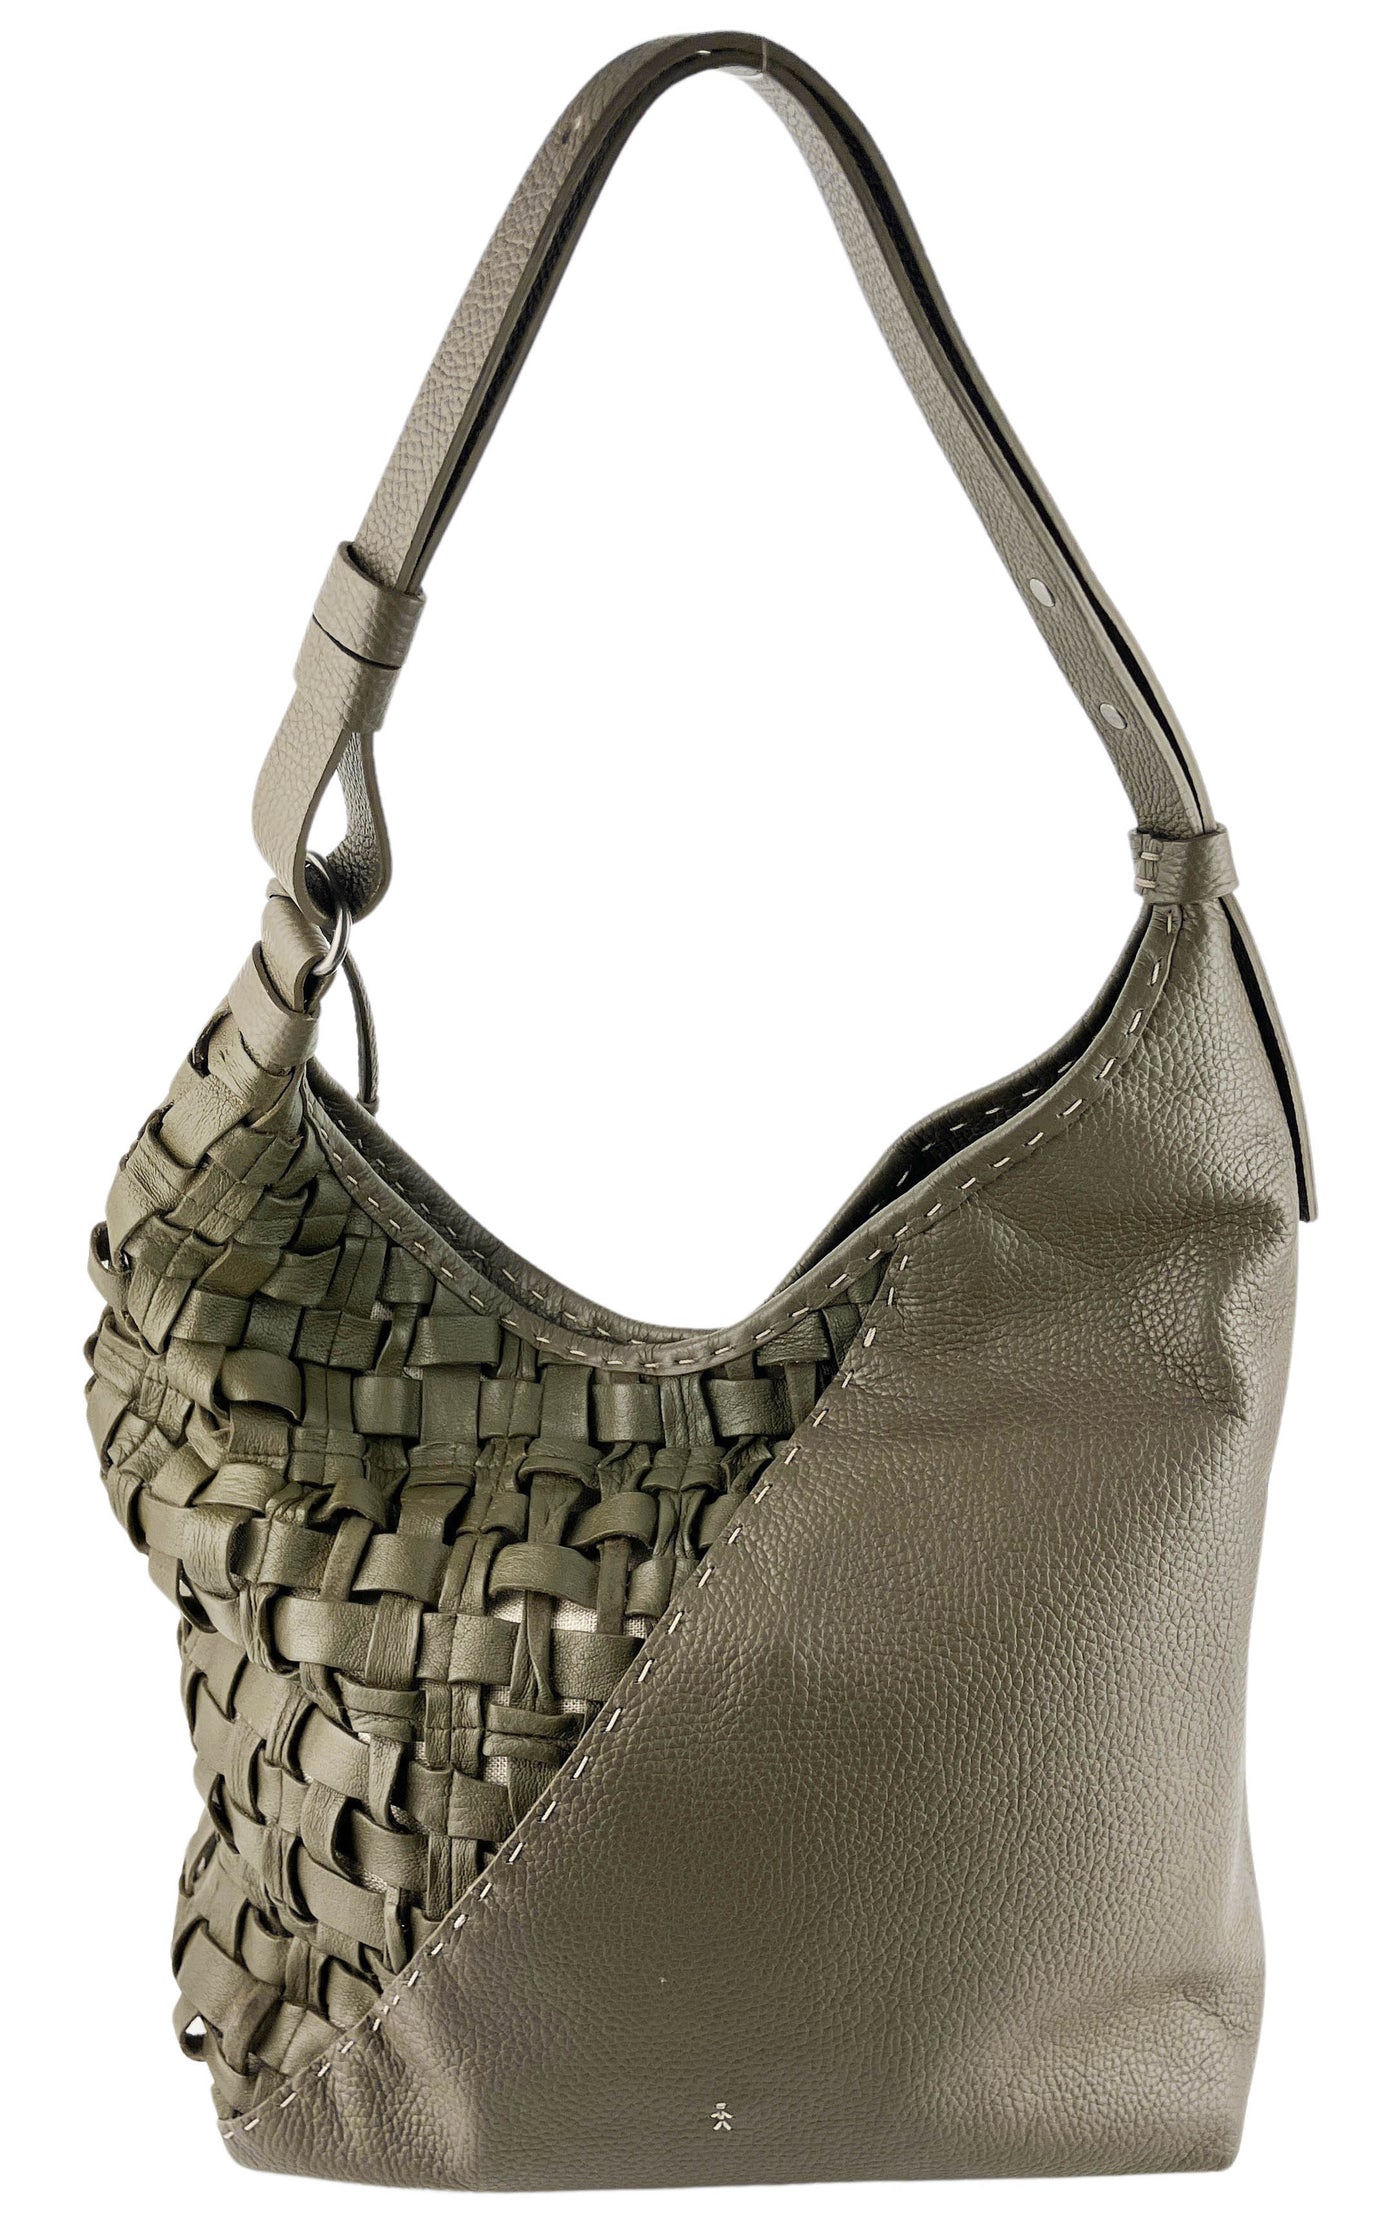 Henry Beguelin Bea Pocket Intreccio Cesta in Olive Green - Discounts on Henry Beguelin at UAL